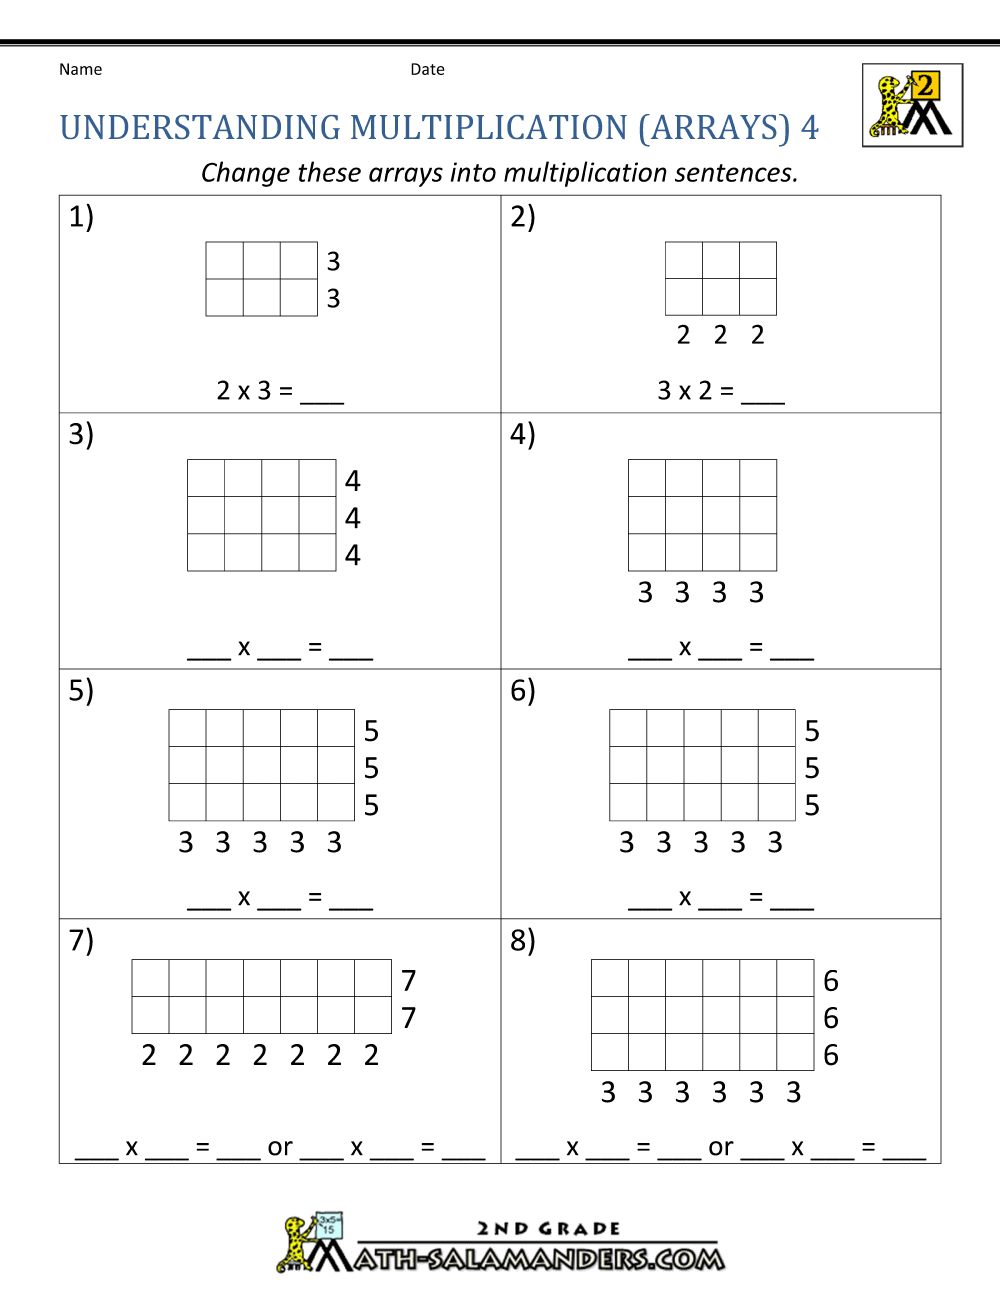 arrays-multiplication-sentence-worksheet-with-answer-key-download-top